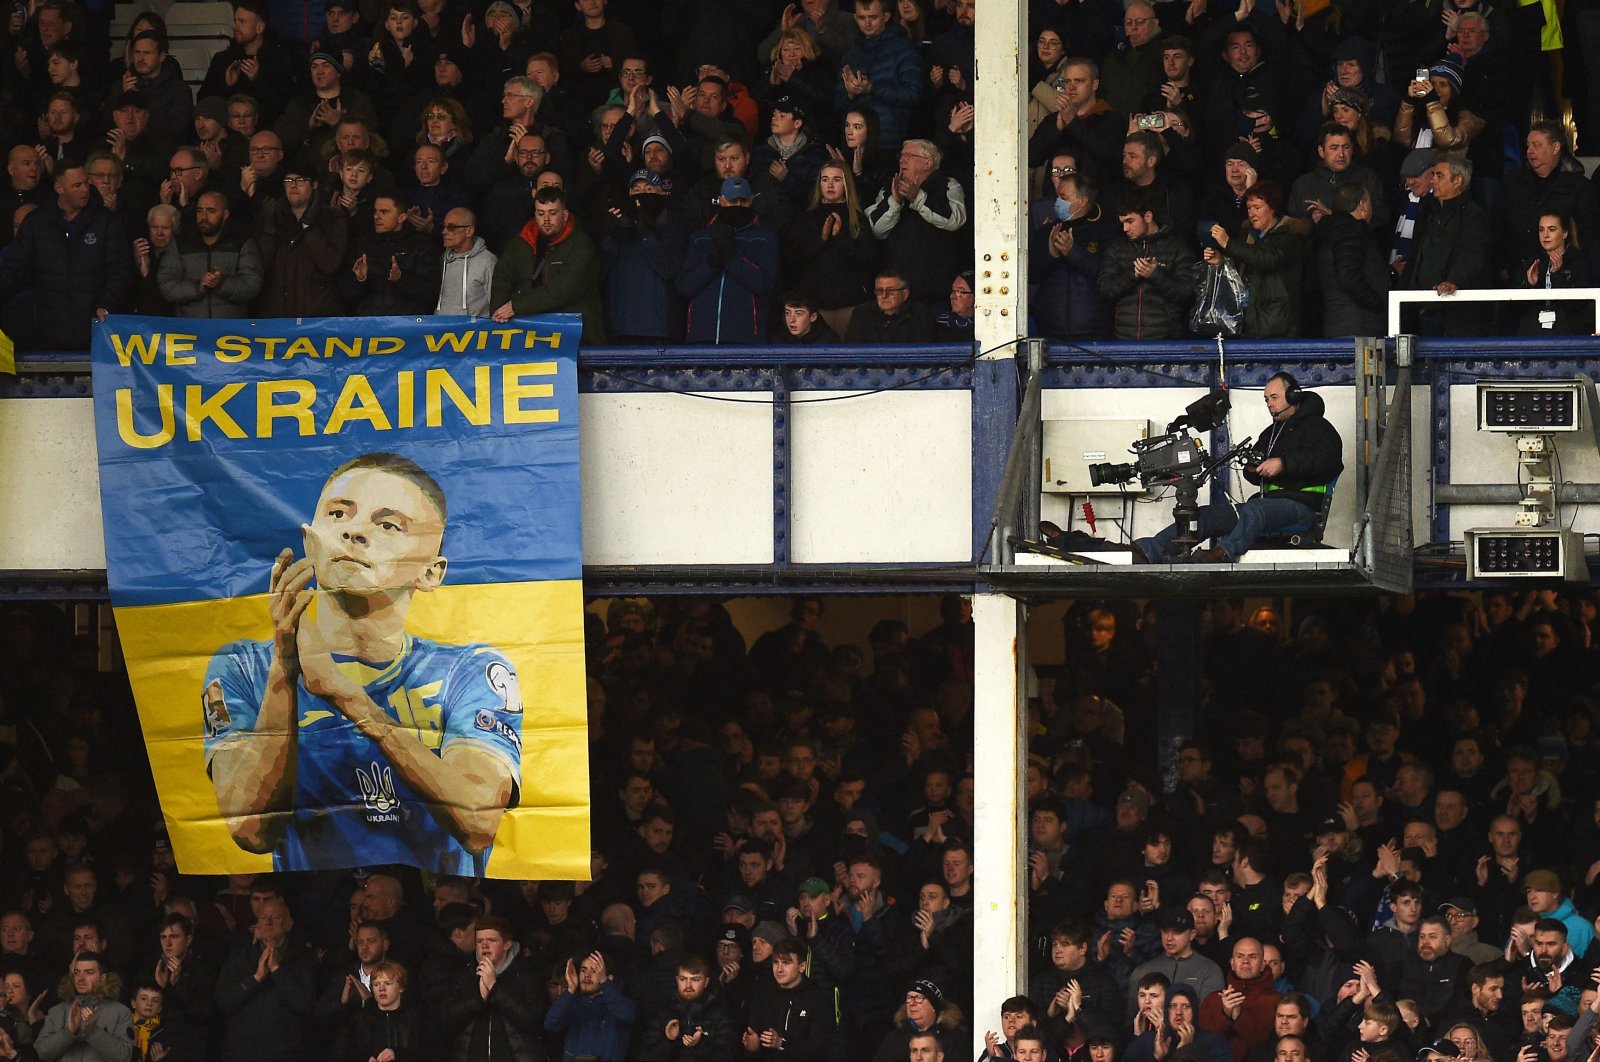 A banner that reads "We stand with Ukraine" is seen during a Premier League match between Everton and Man City, Liverpool, England, Feb. 26, 2022. (AFP Photo)